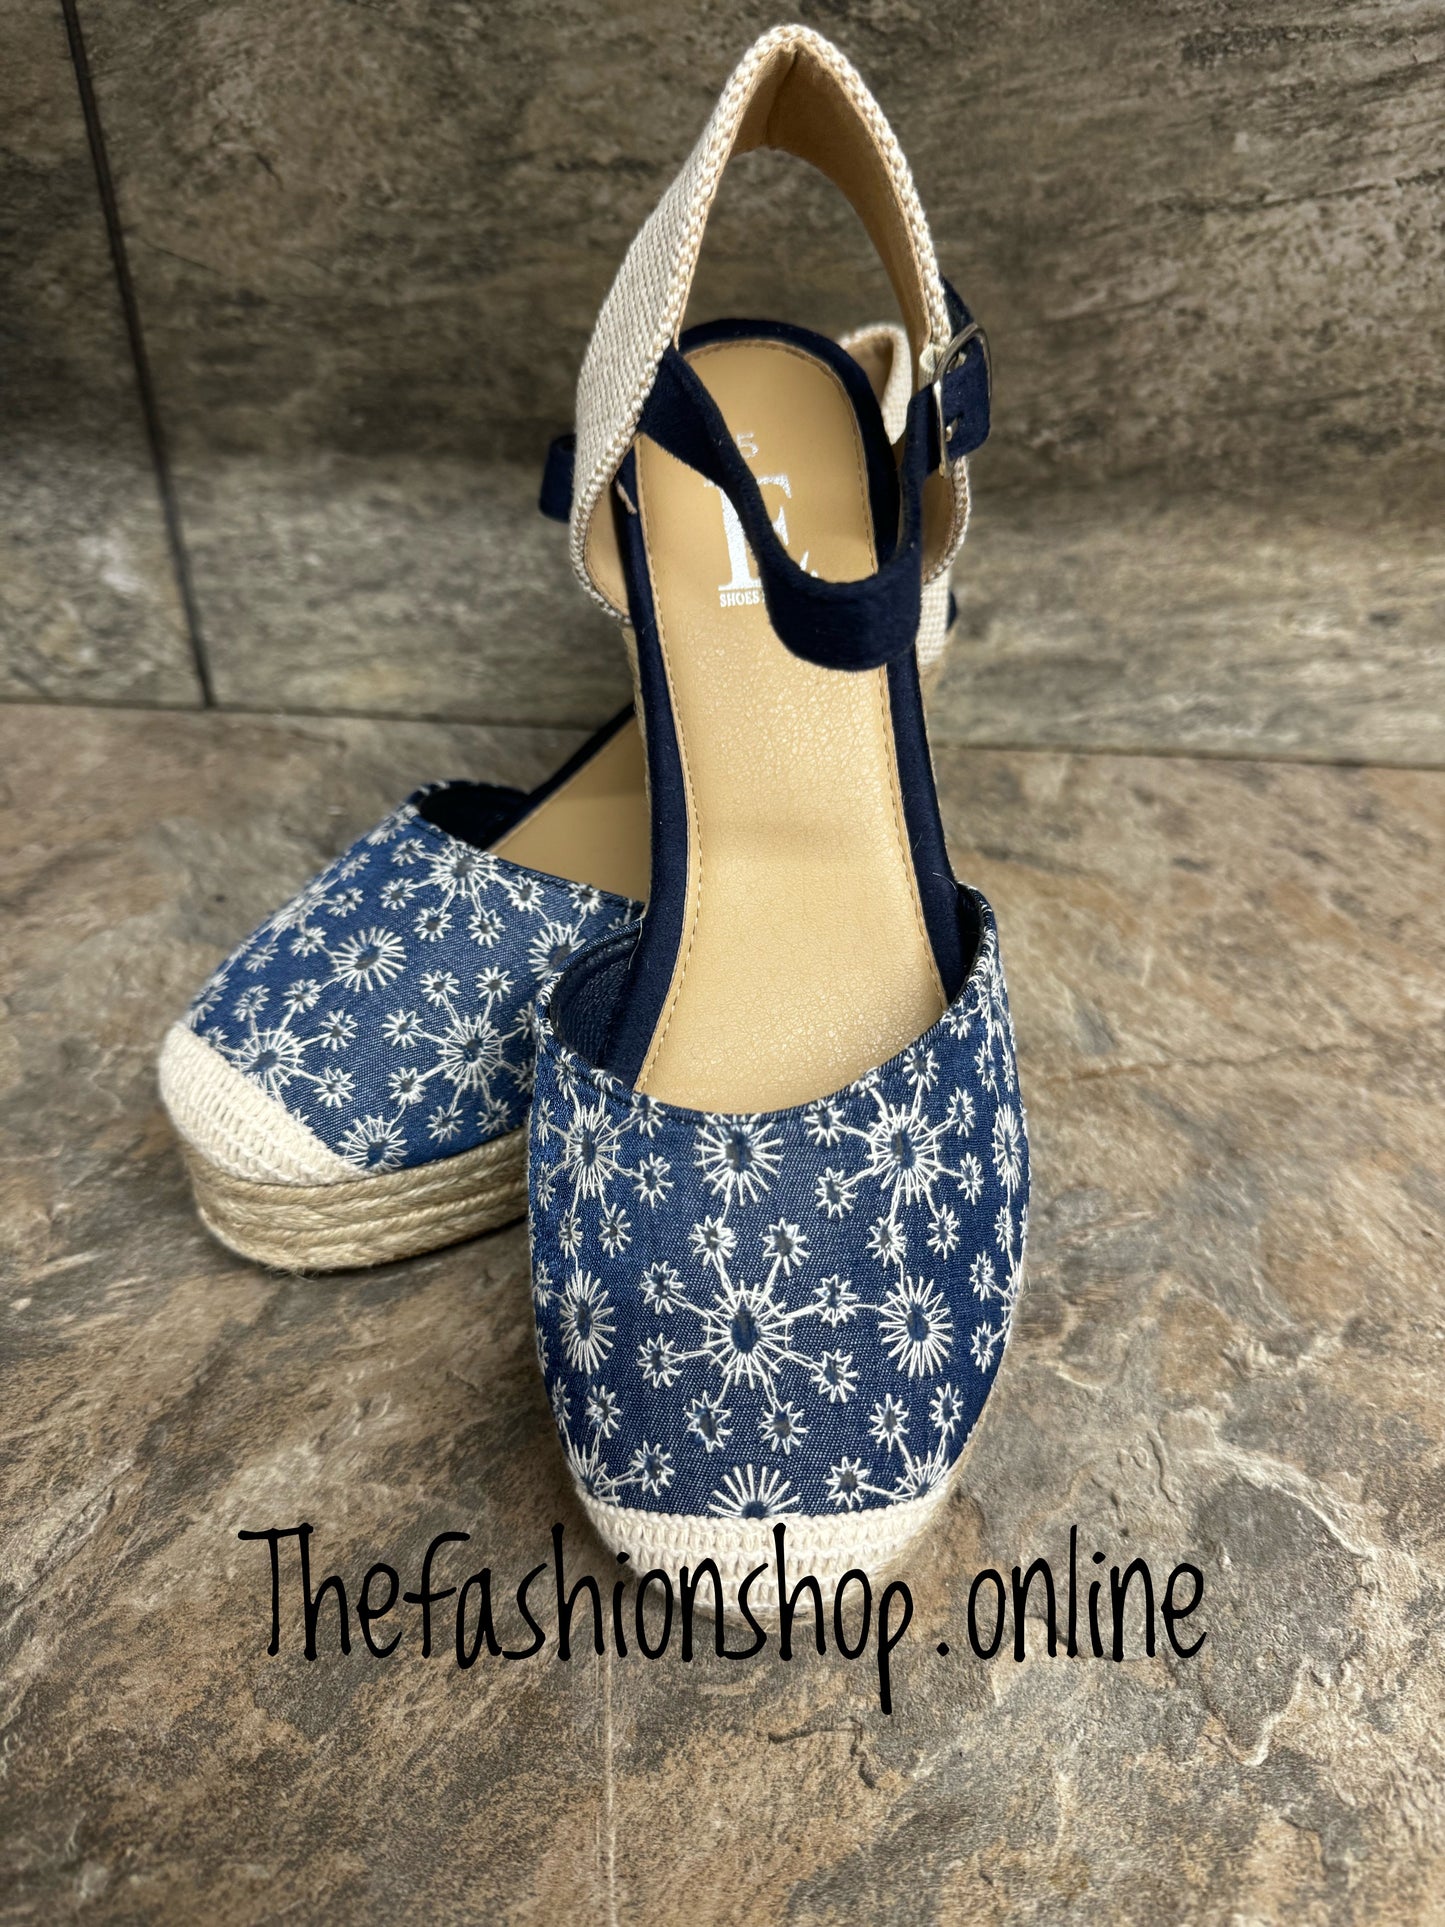 Denim broderie anglaise espadrille wedge sizes 4-8